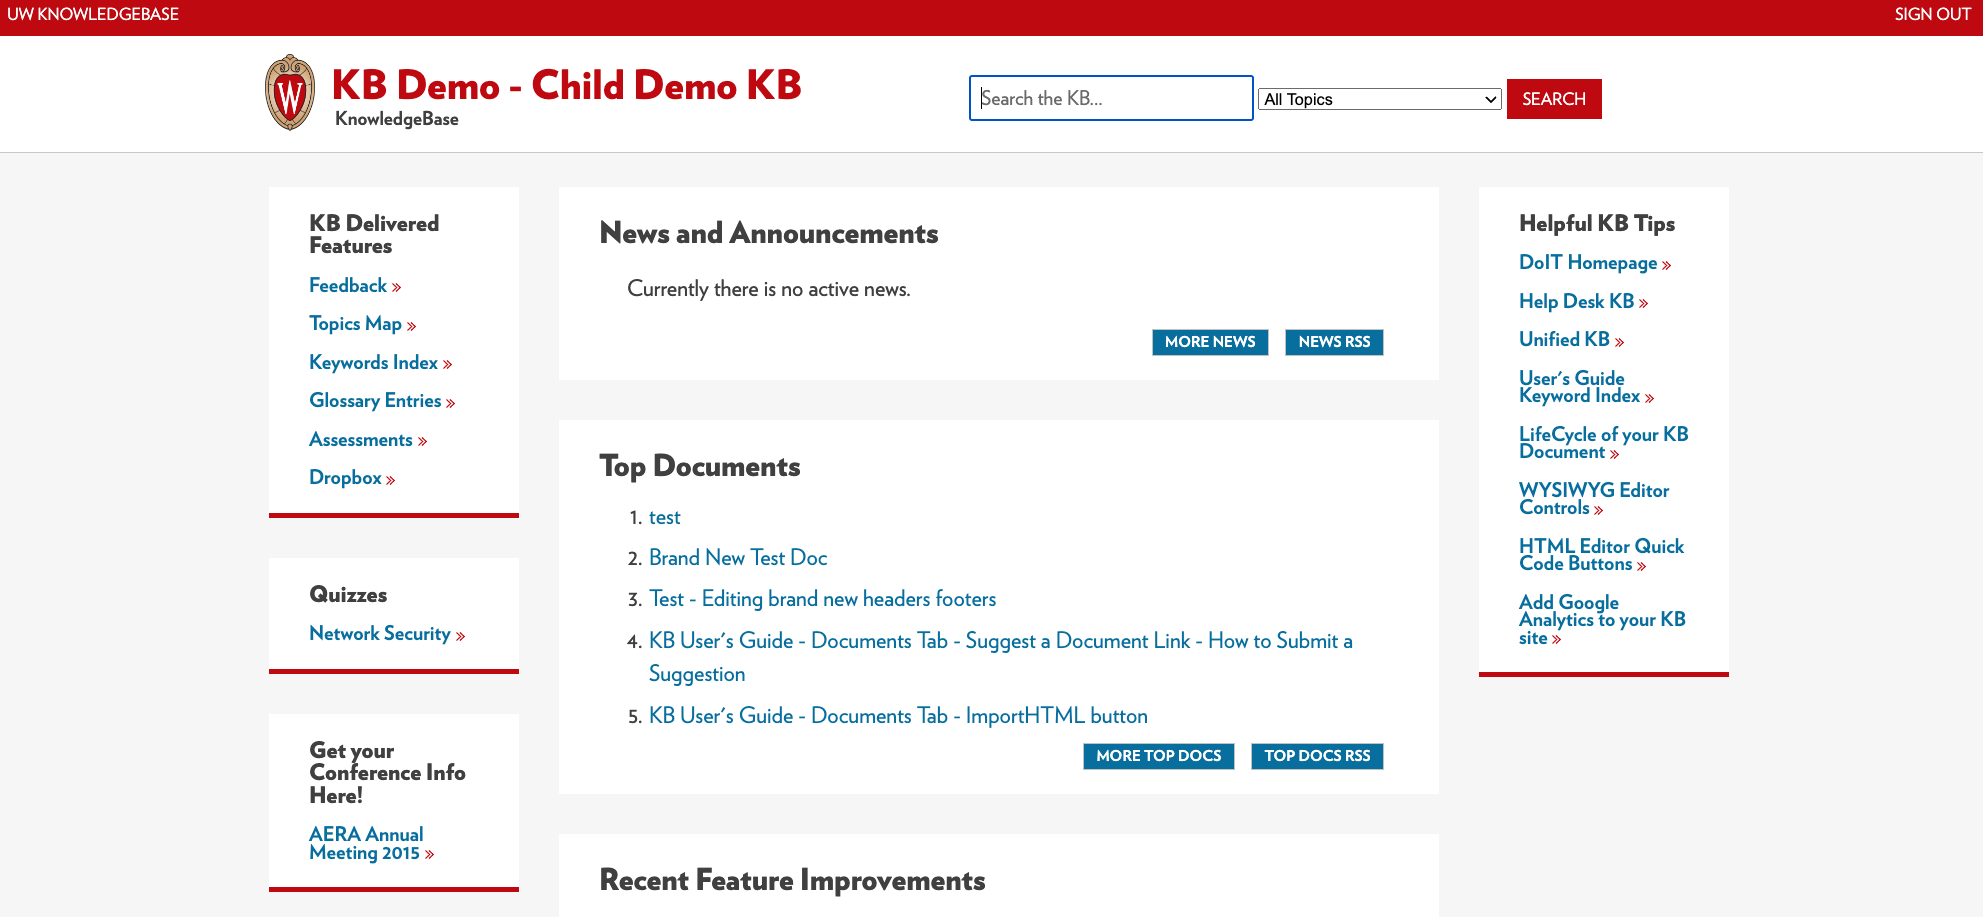 100% width layout example of a KB site with 3 columns of content